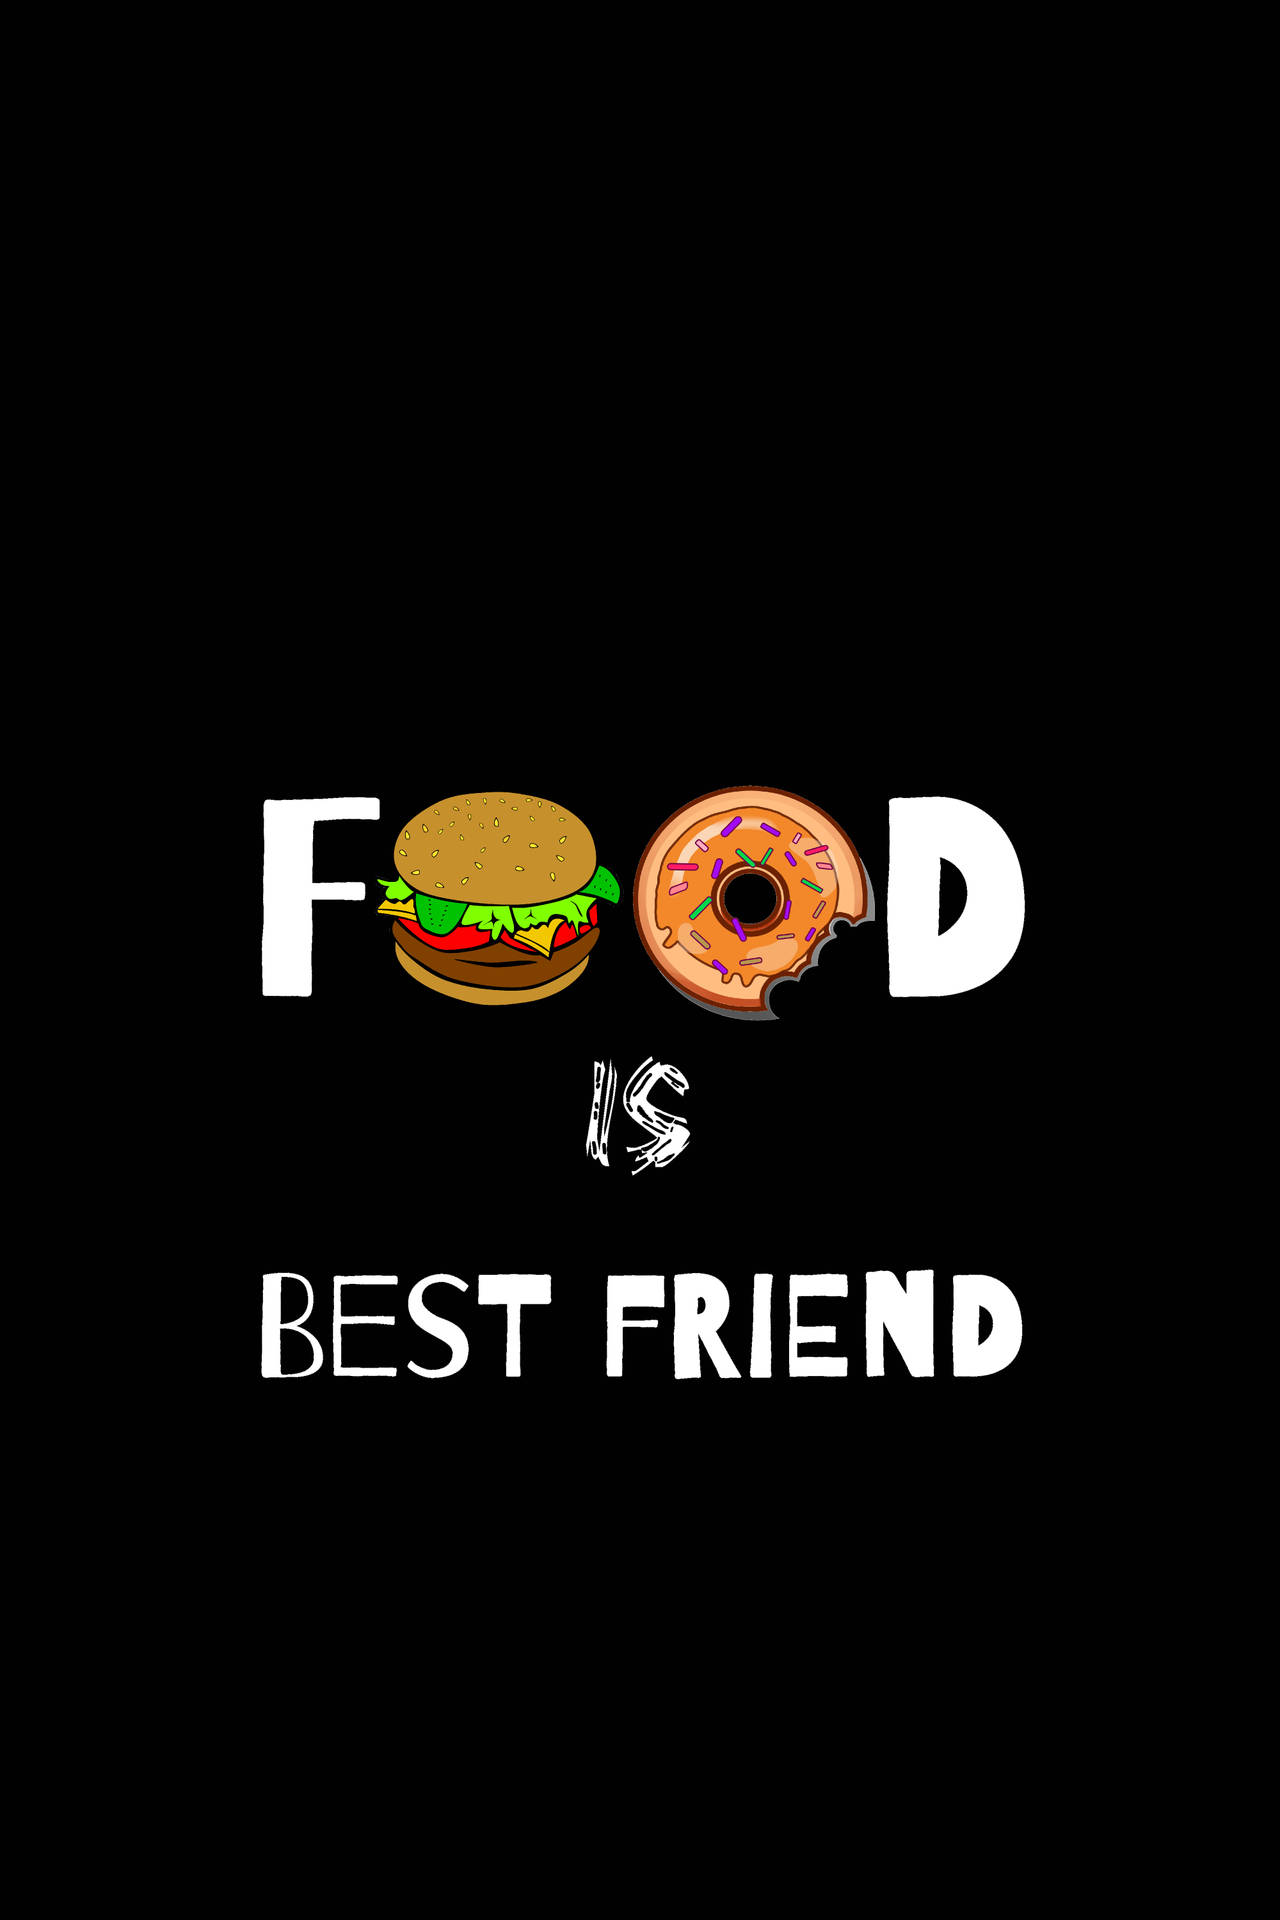 Food Quotes Black Mobile Wallpaper